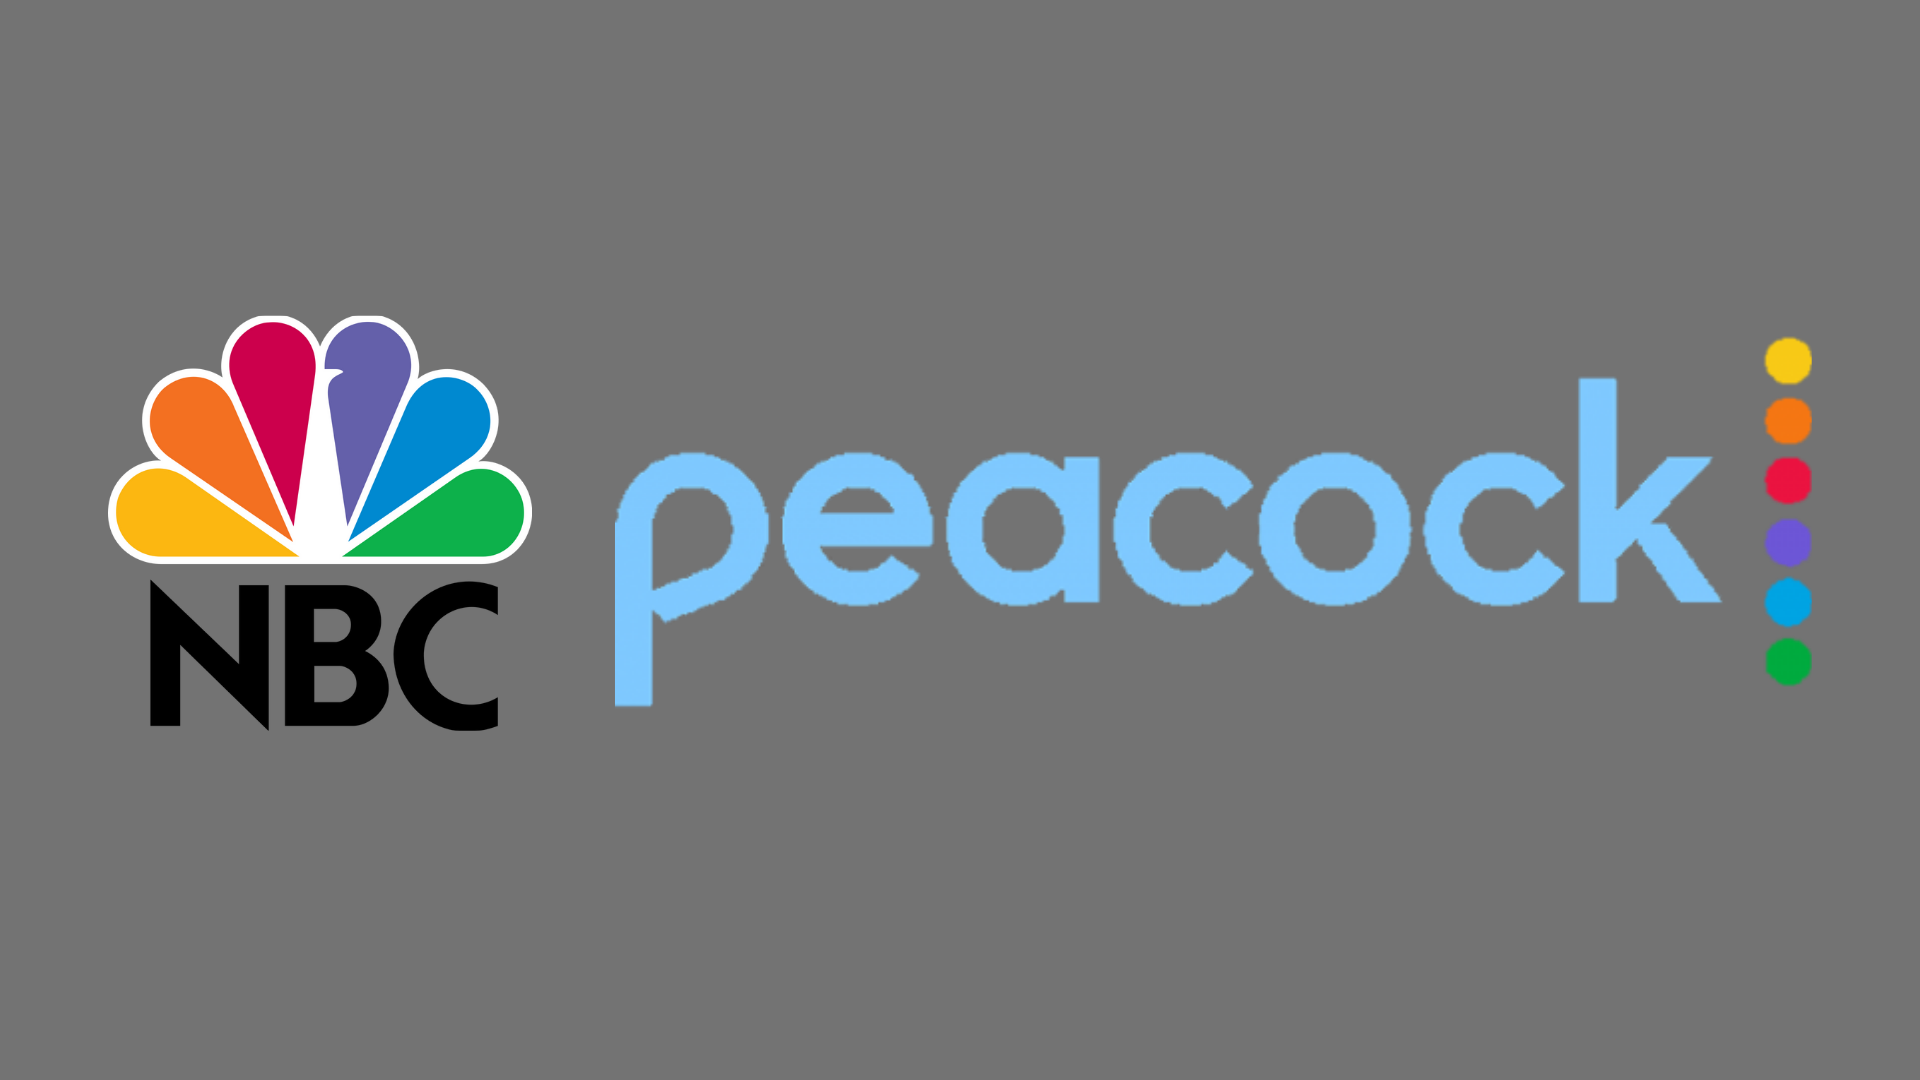 NBC’s New Peacock Streaming Service Will Take Flight On July 15, Tencent Expands Video Streaming In Asia With Iflix Acquisition And Other Top News